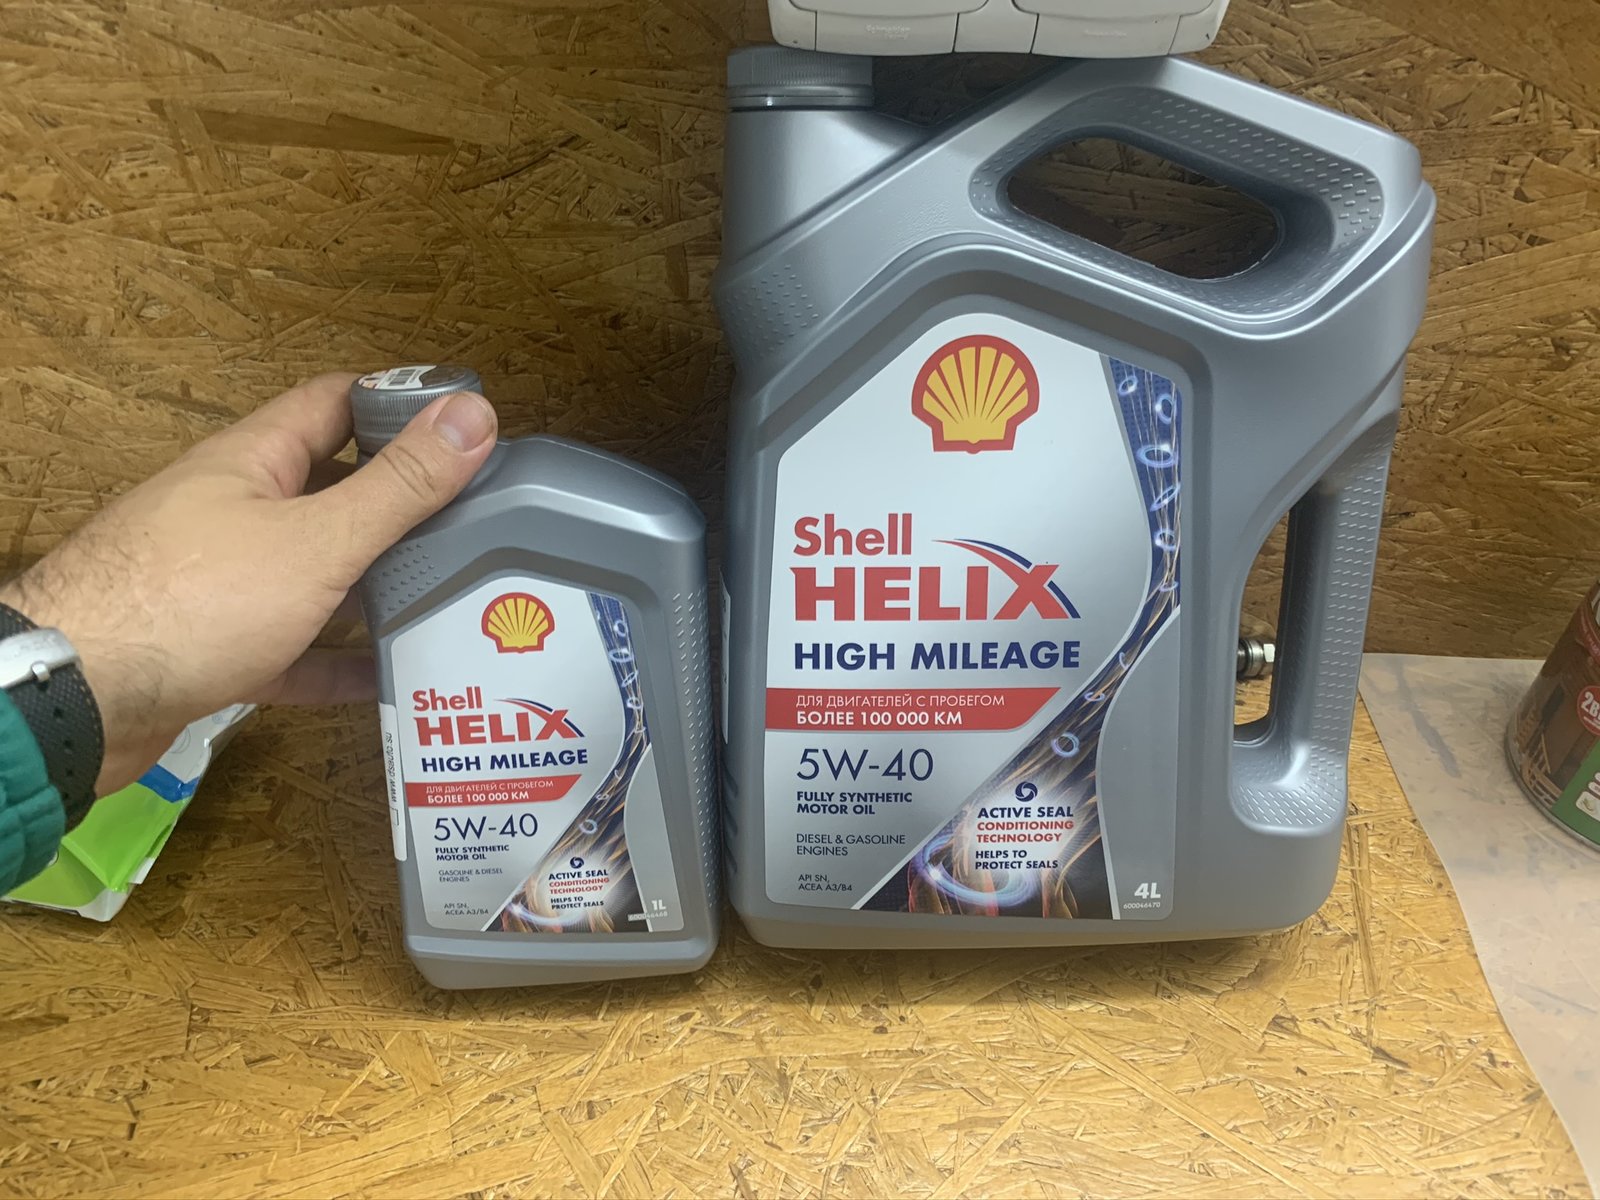 Shell helix high mileage